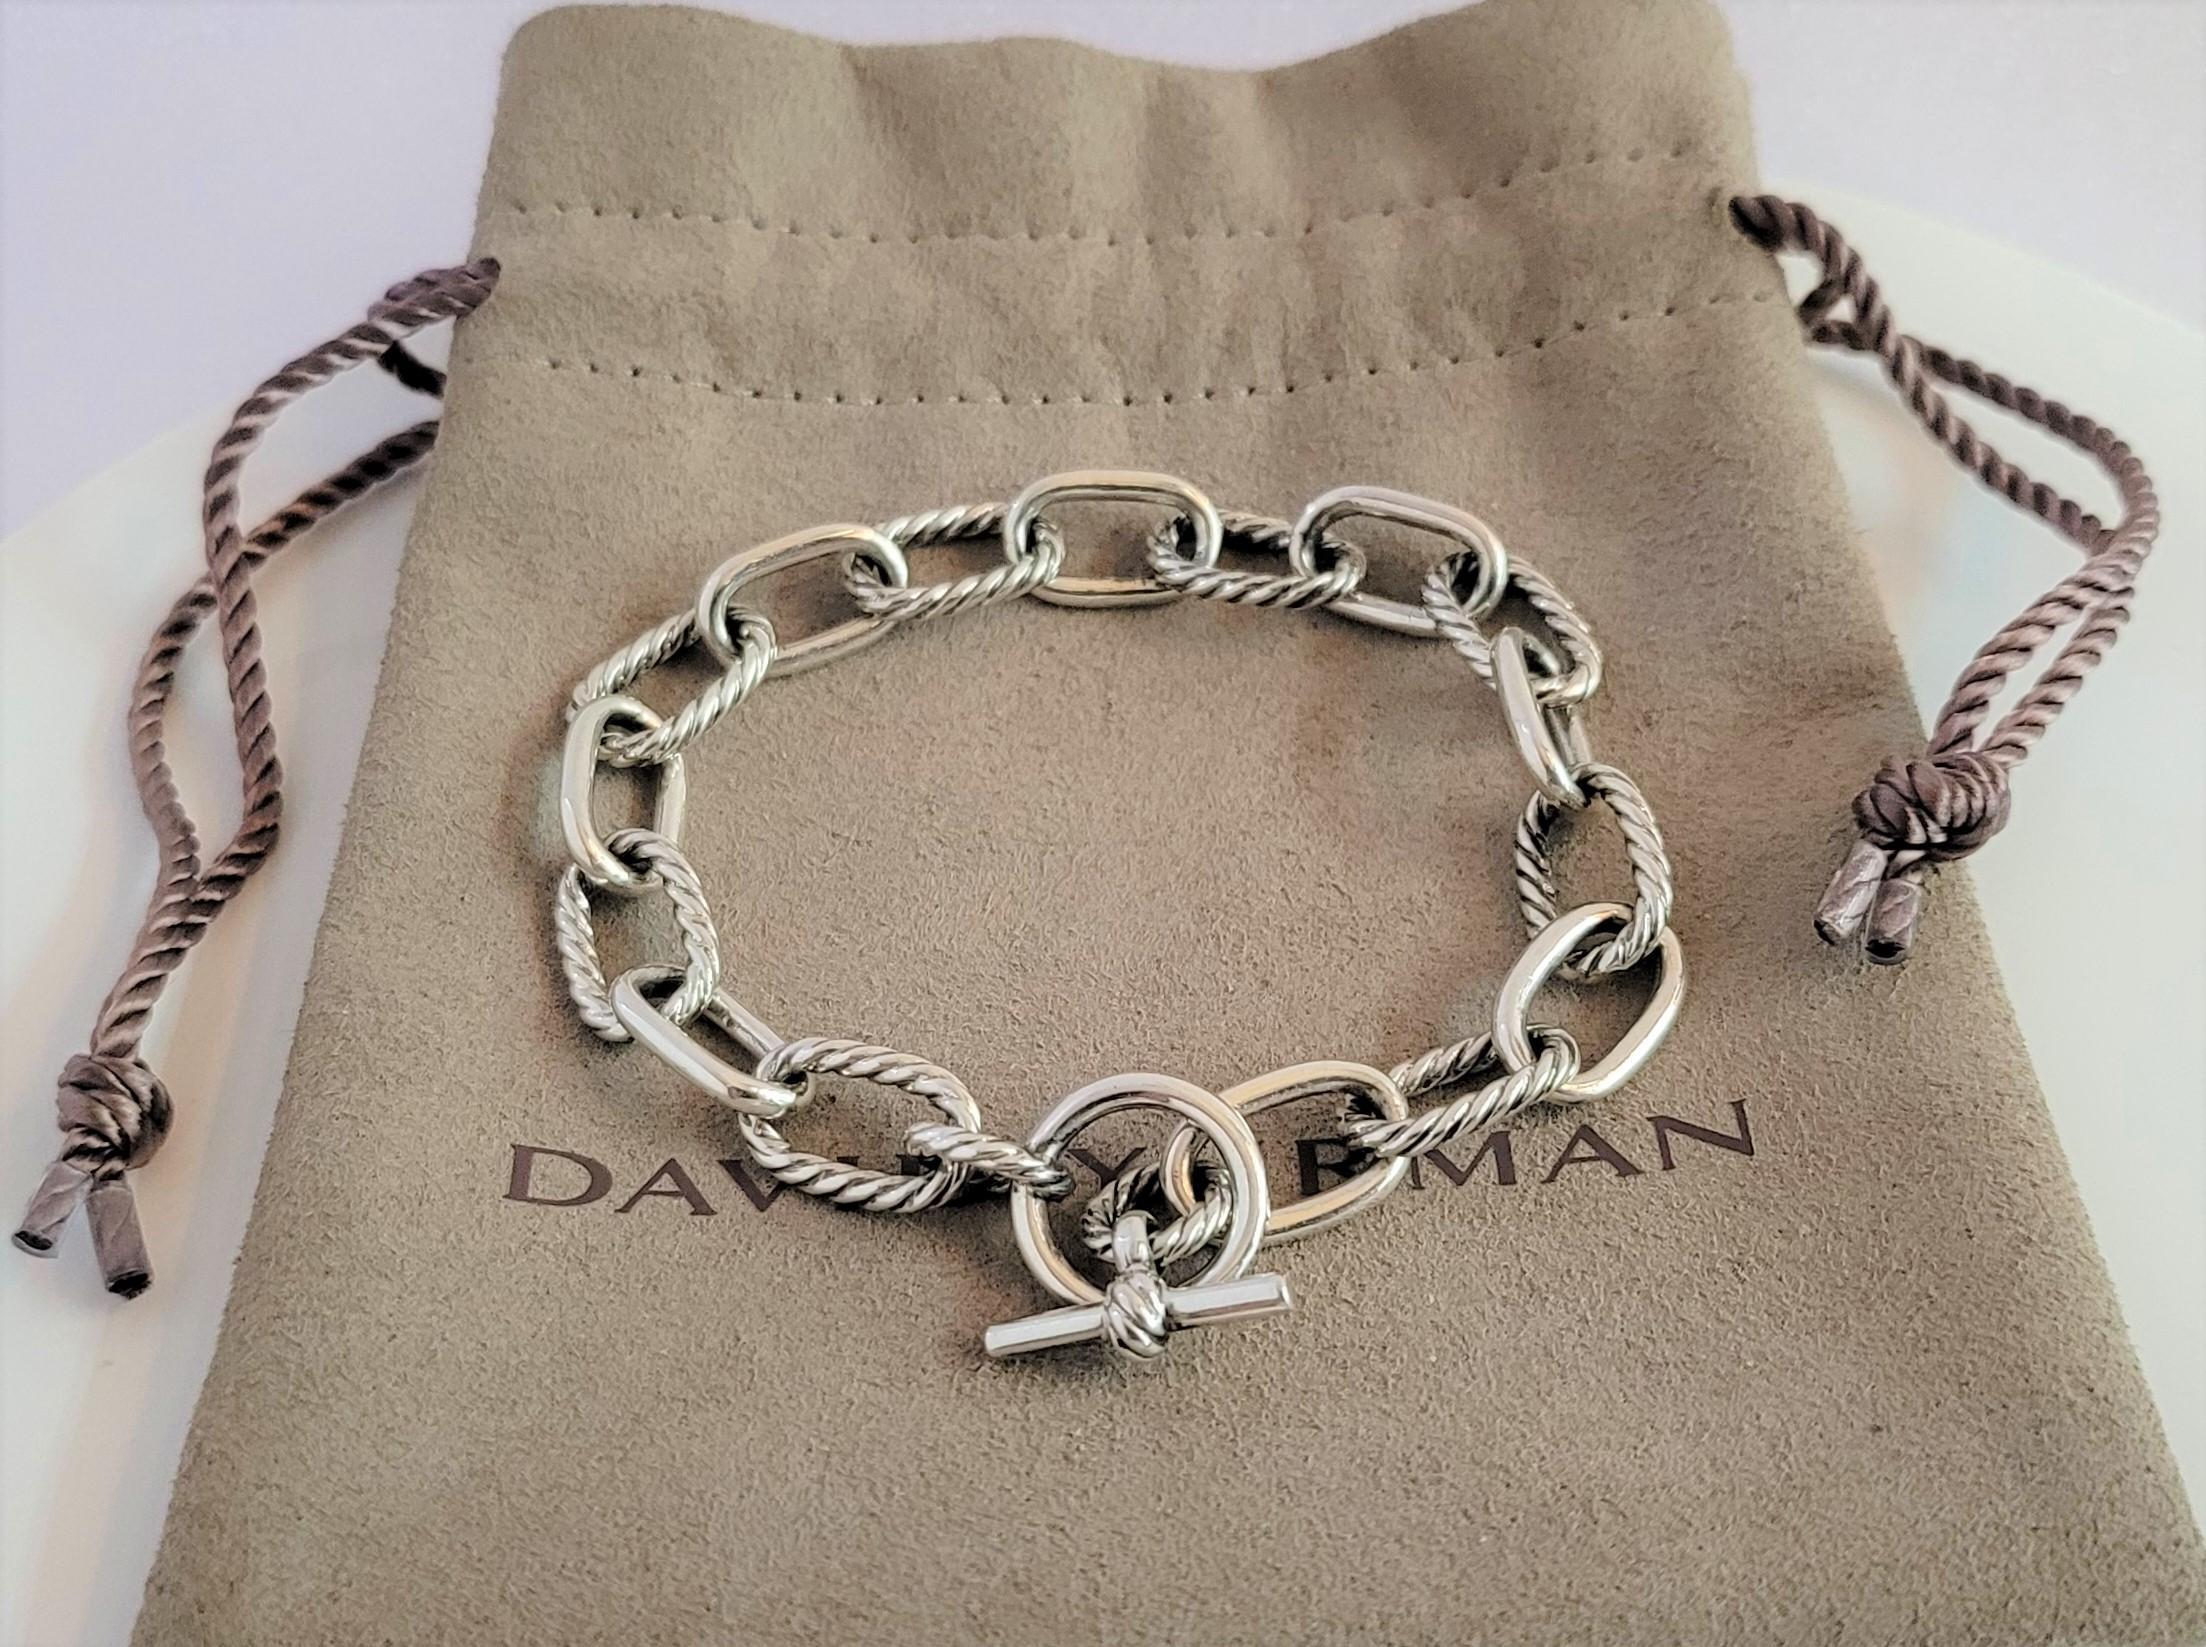 David Yurman DY Madison Toggle Chain Bracelet - Small In New Condition For Sale In New York, NY